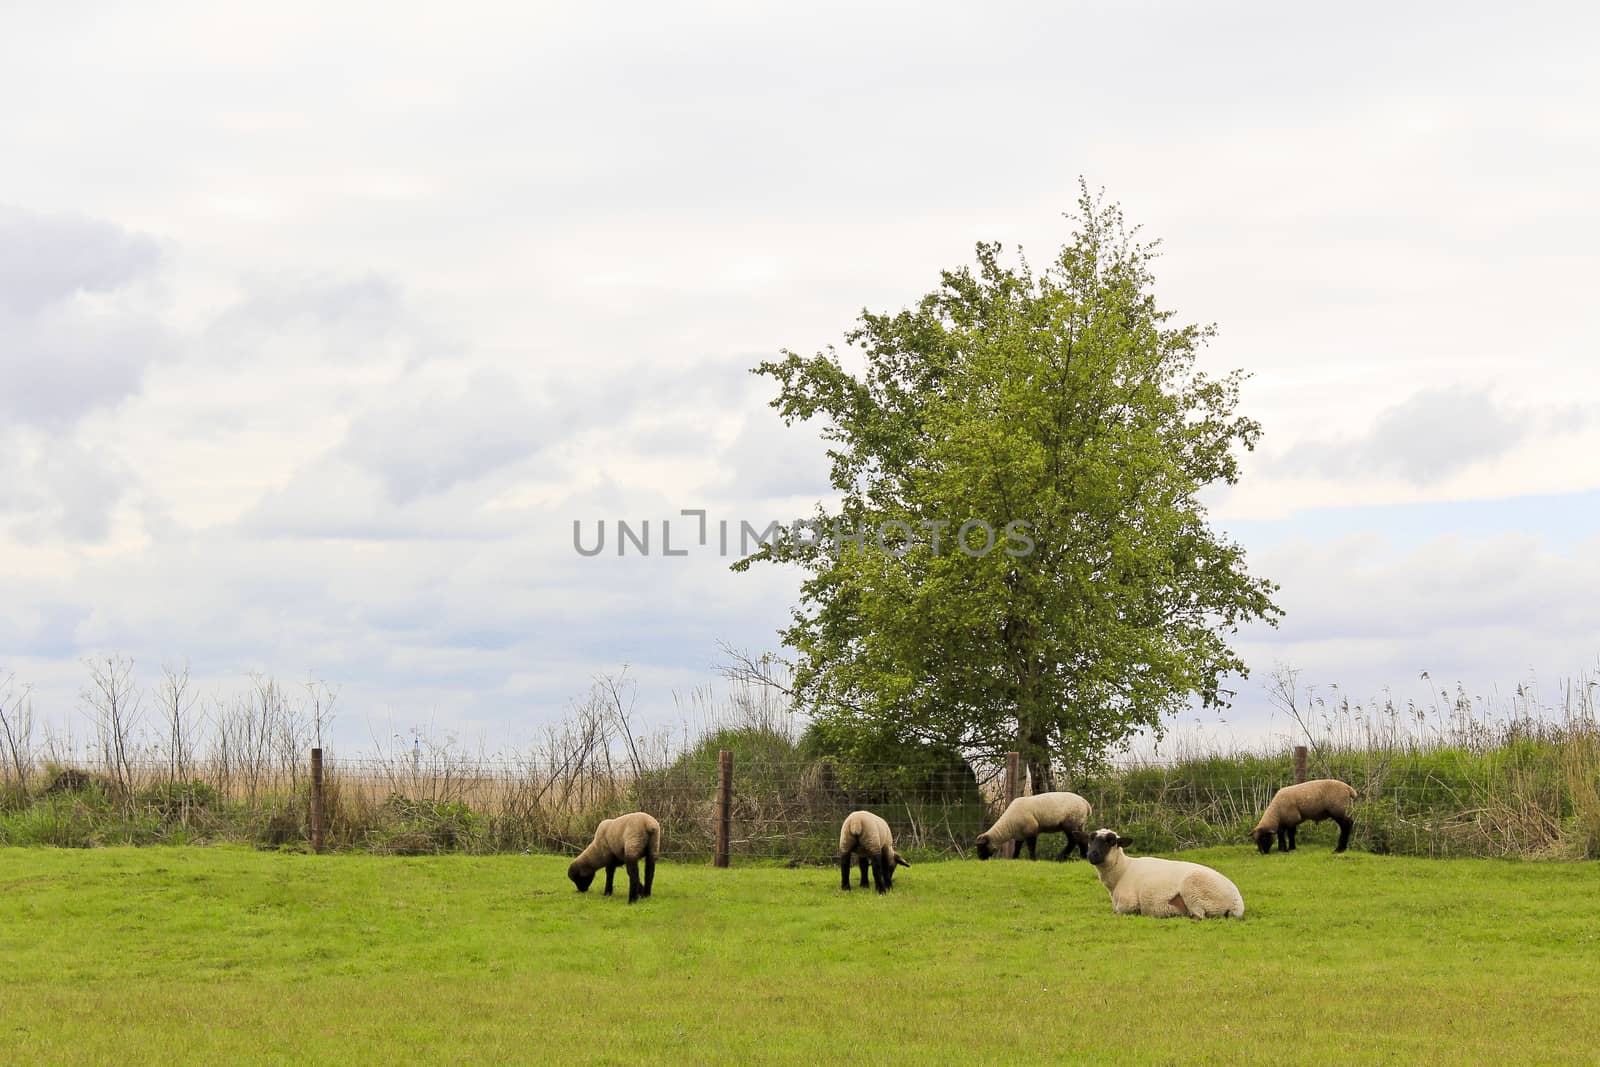 Flock of sheep on lonely countryside in Lower Saxony, Germany. by Arkadij